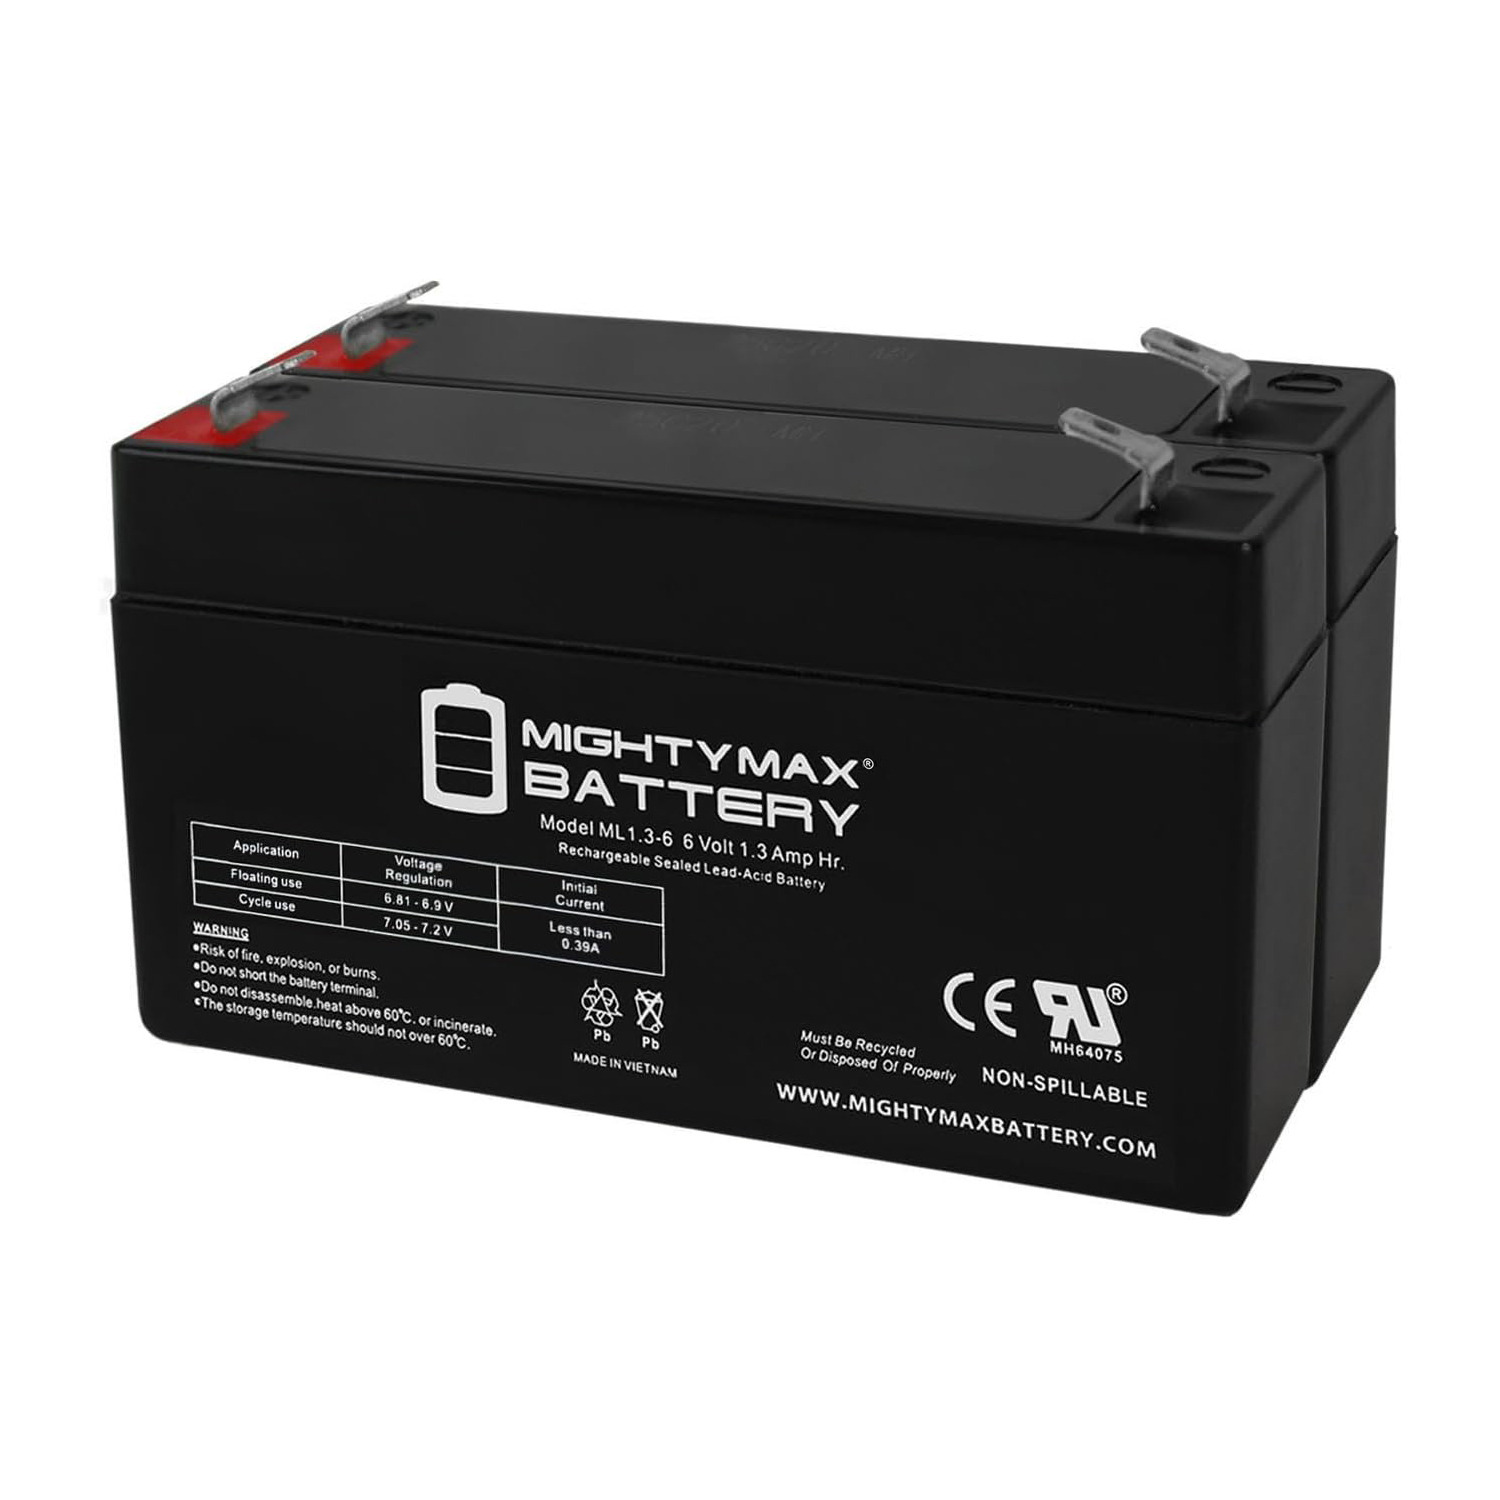 6V 1.3Ah SLA Replacement for CSB GP613 UPS Battery - 2 Pack